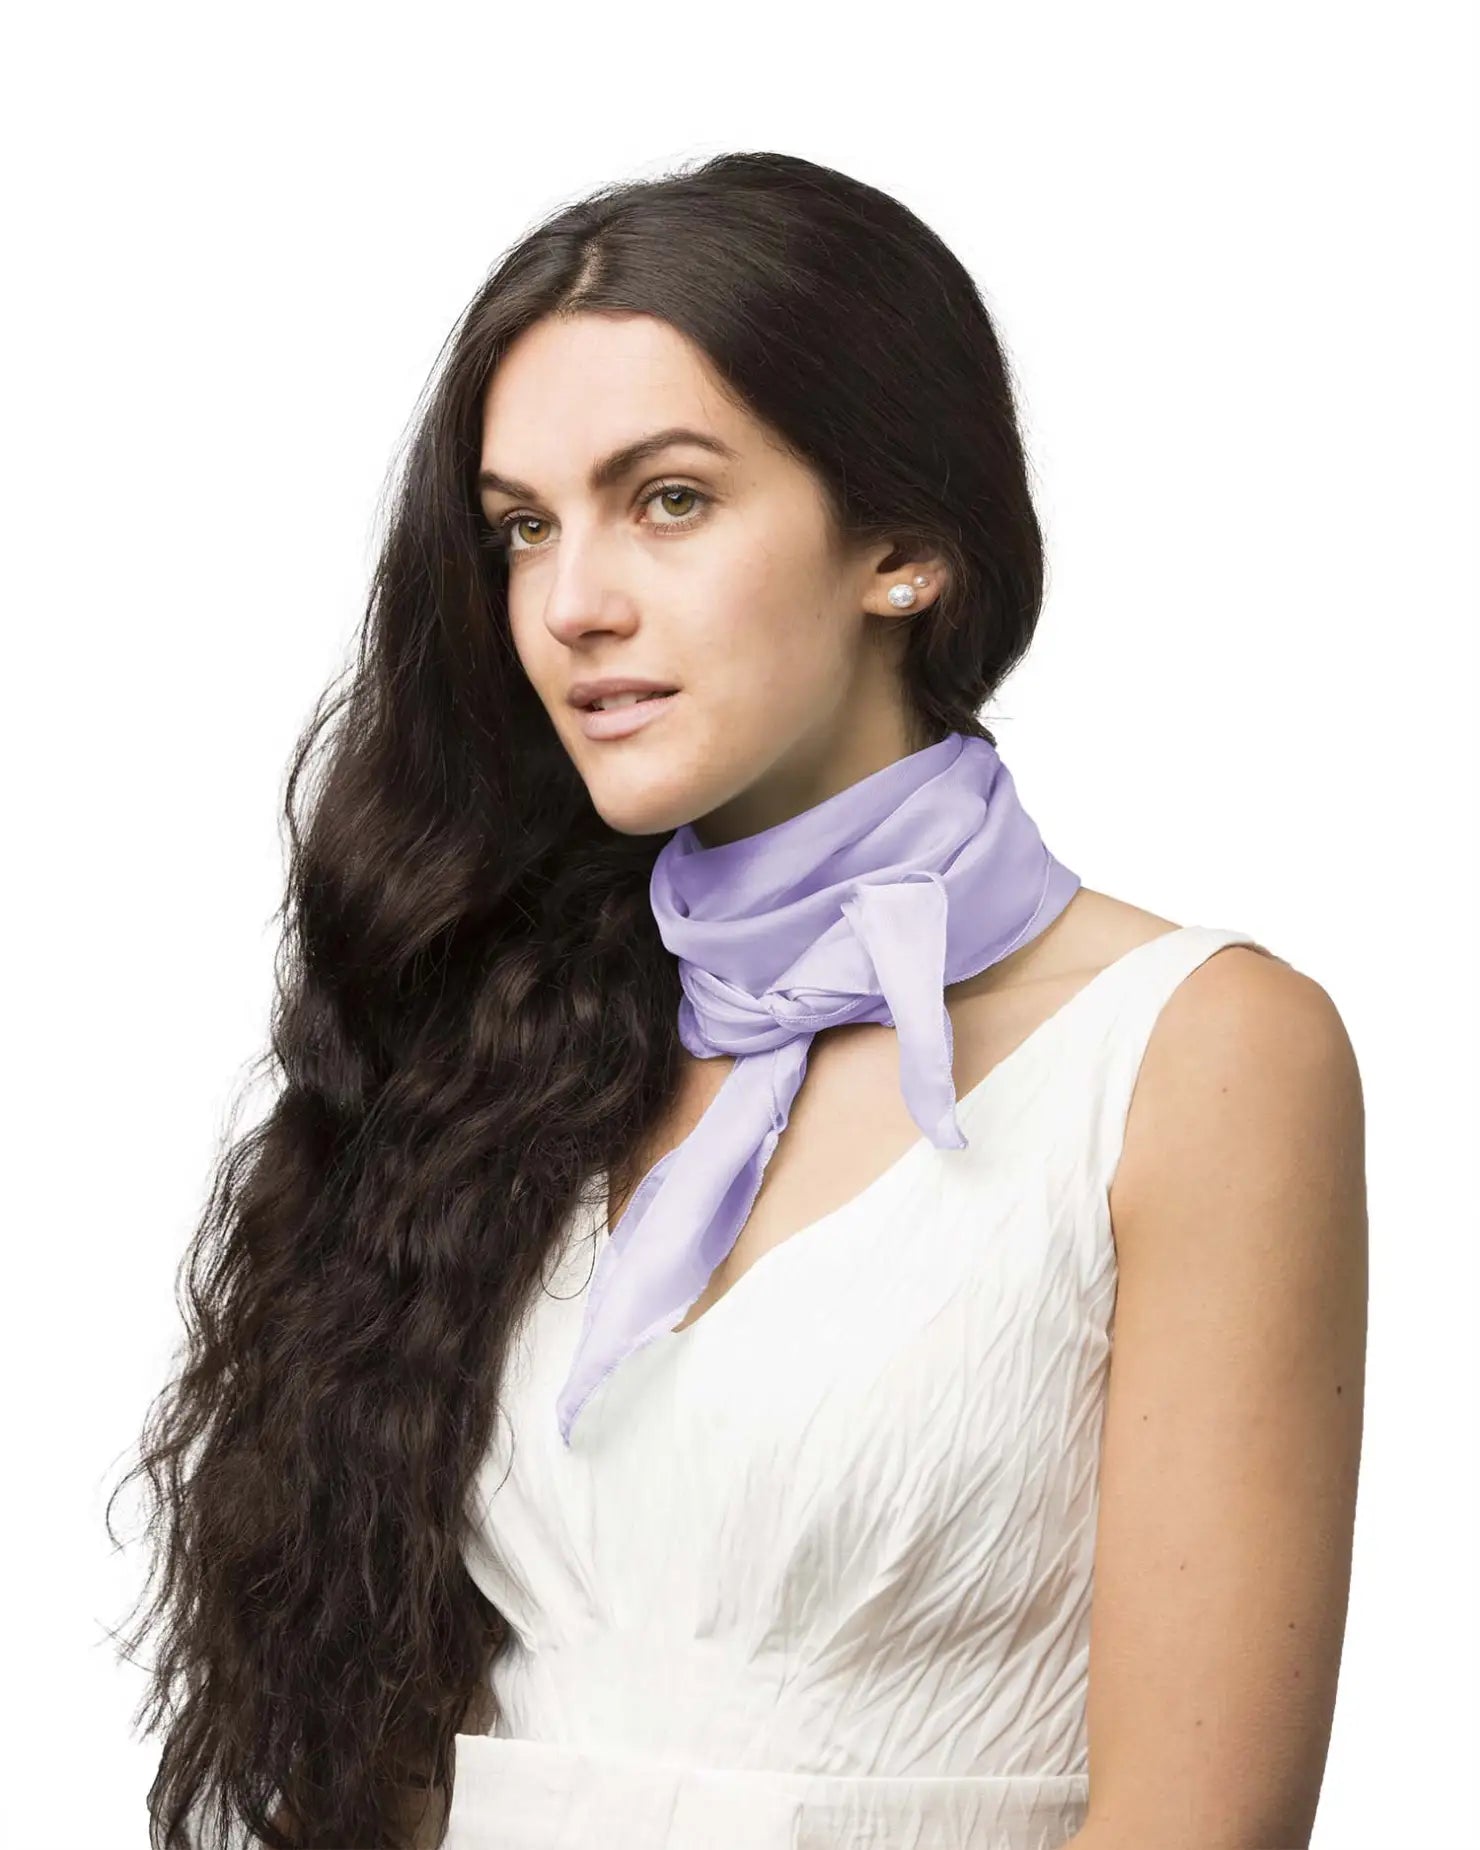 Chiffon square scarf in purple, worn by woman